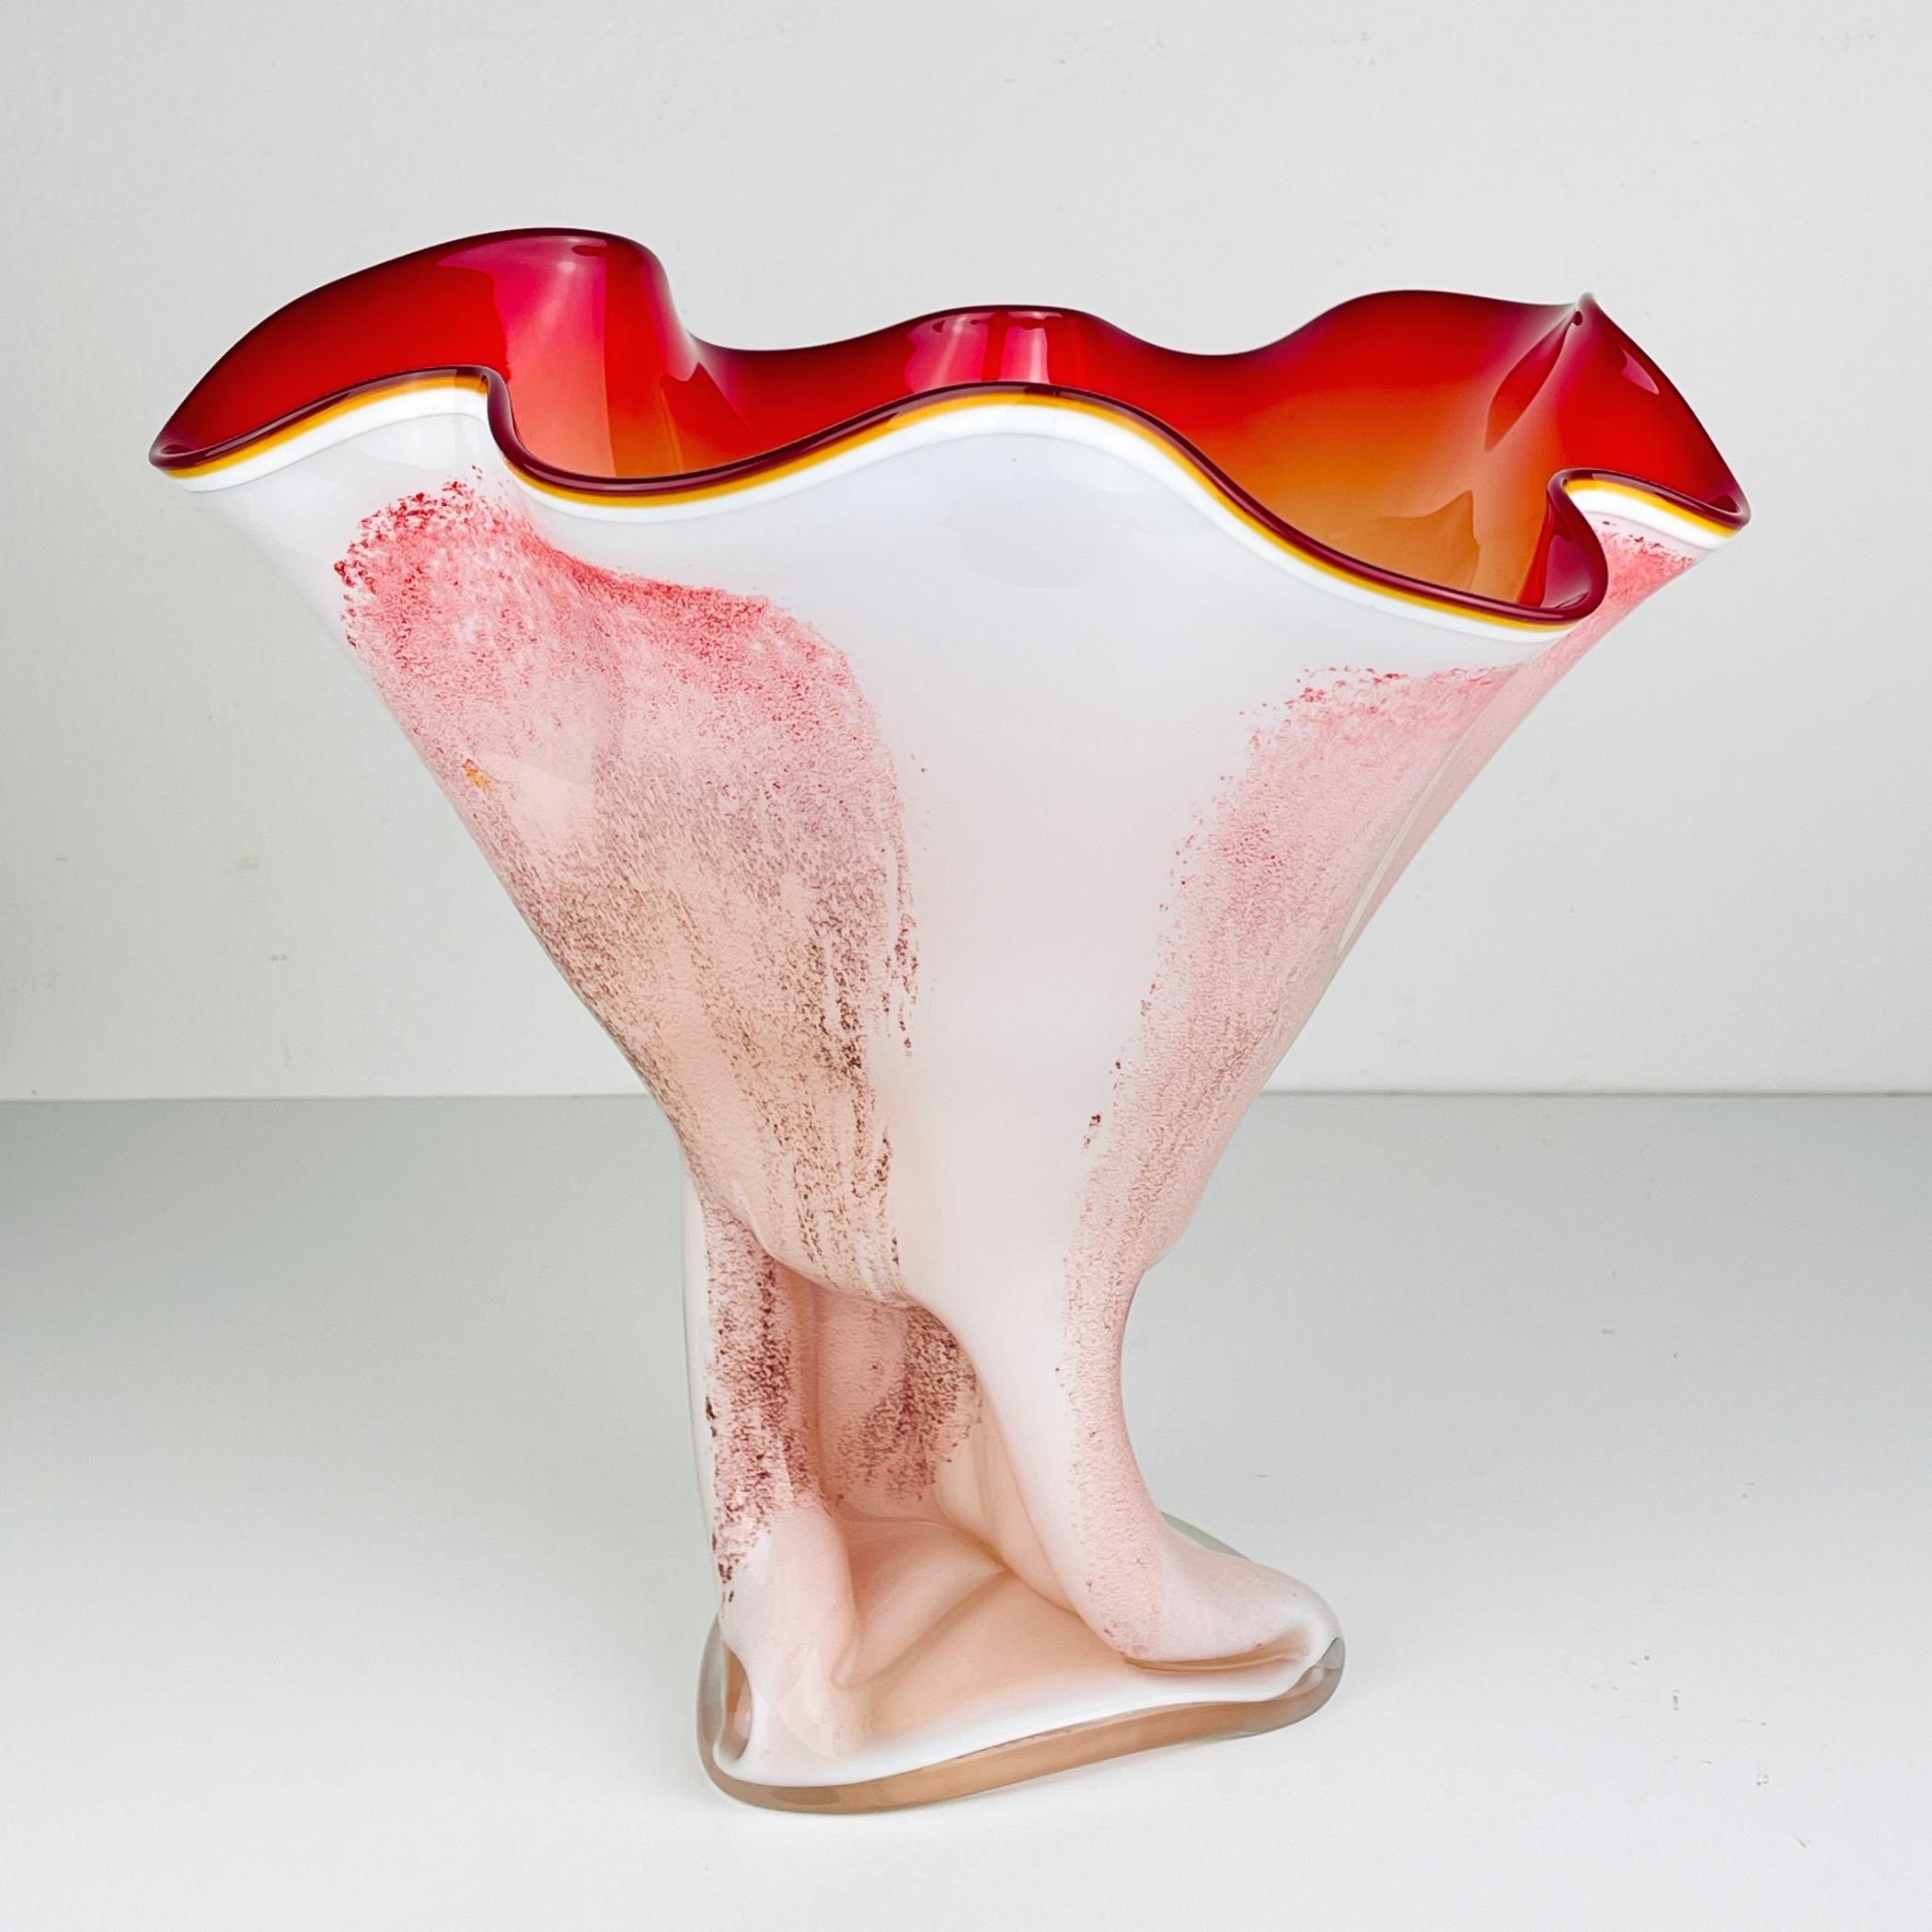 Embrace the essence of Italian artistry with this captivating Mid-Century Murano Glass Vase, a splendid creation from 1970s Italy. The original label has been preserved. The sleek and avant-garde design of this vase embodies the spirit of Italian